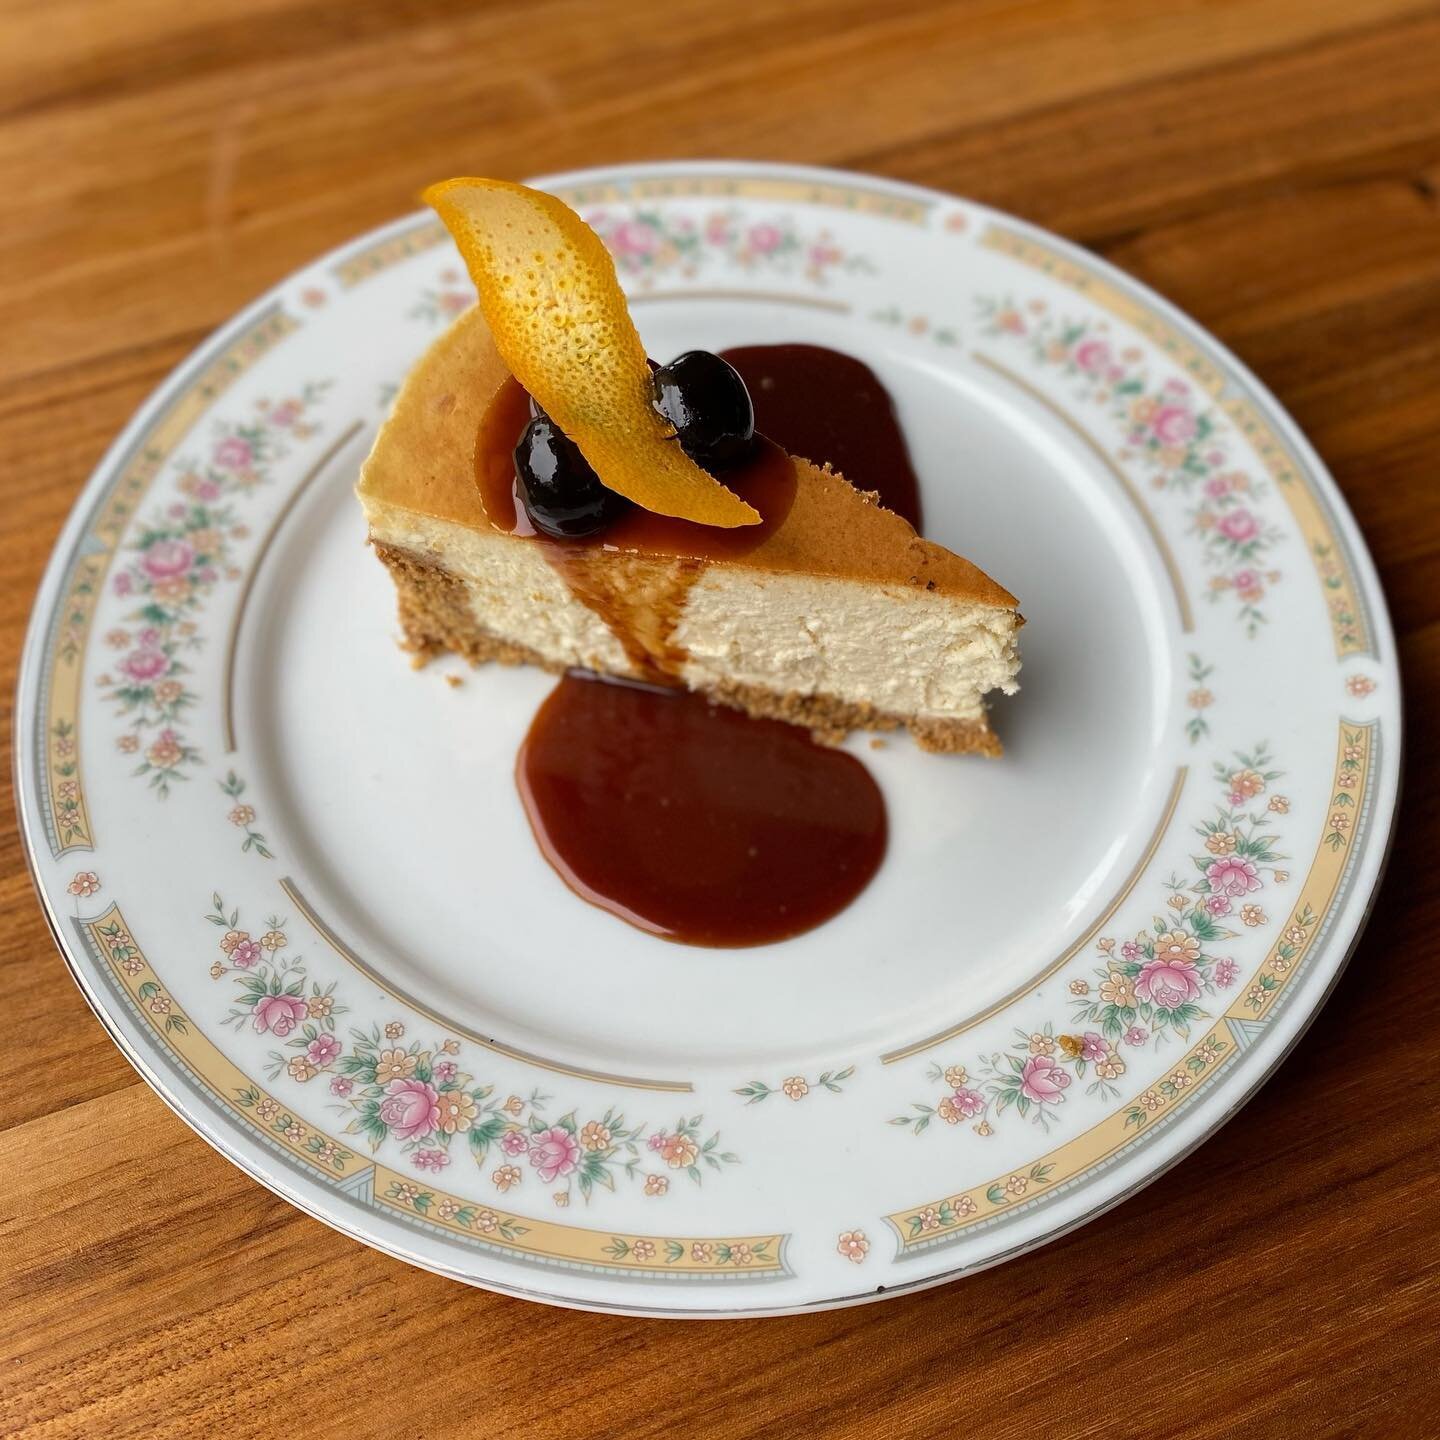 We got a newby here. Old Fashioned Cheesecake has made her way onto our new lunch AND dinner menu. Bourbon demerara cheesecake, graham crust, orange zest, bourbon caramel, and can&rsquo;t forget the fancy cherry. #cherryontop #bourboncheesecake #imea